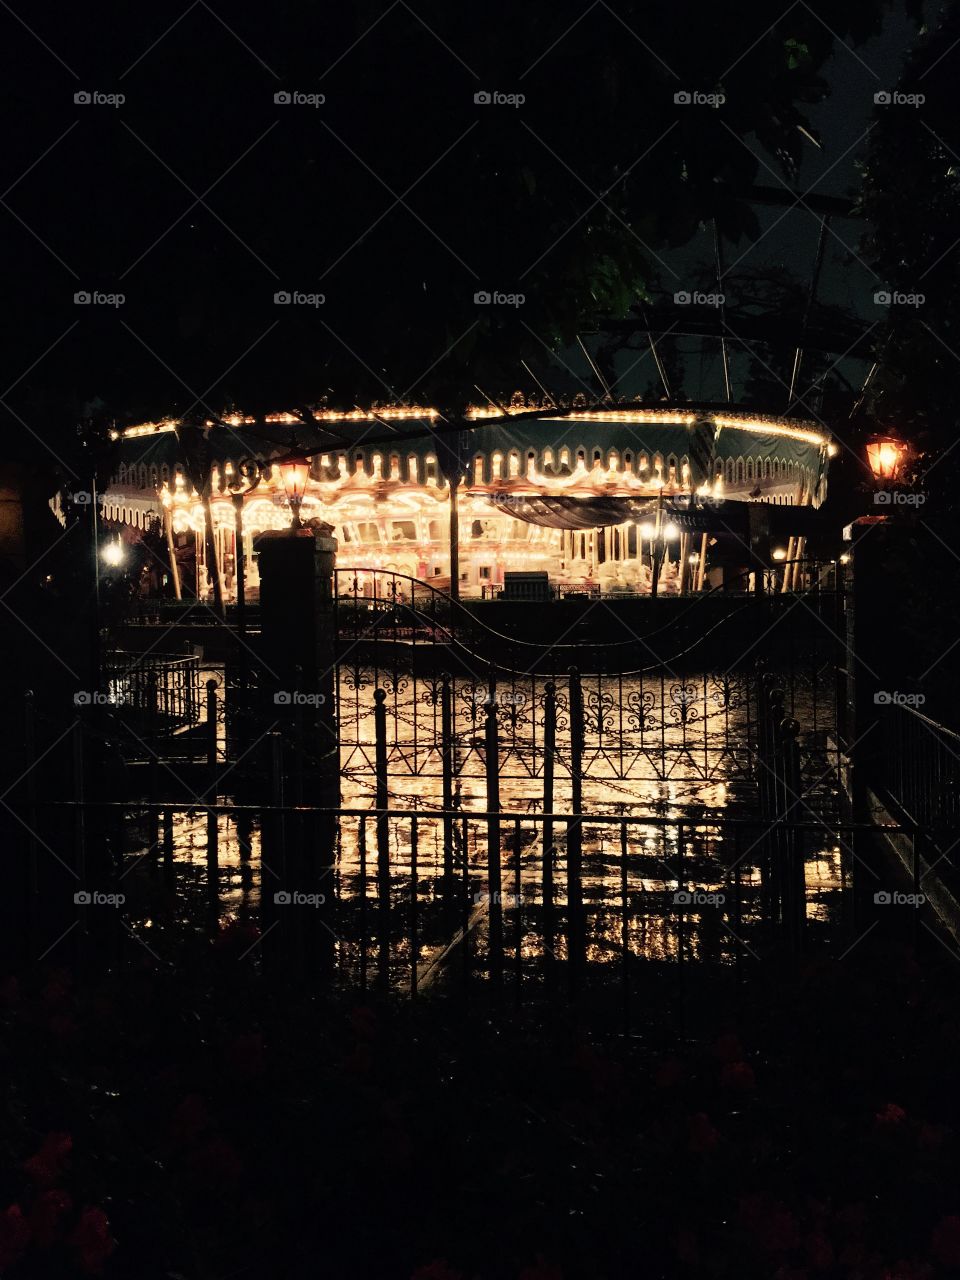 Merry-go-round reflected at night